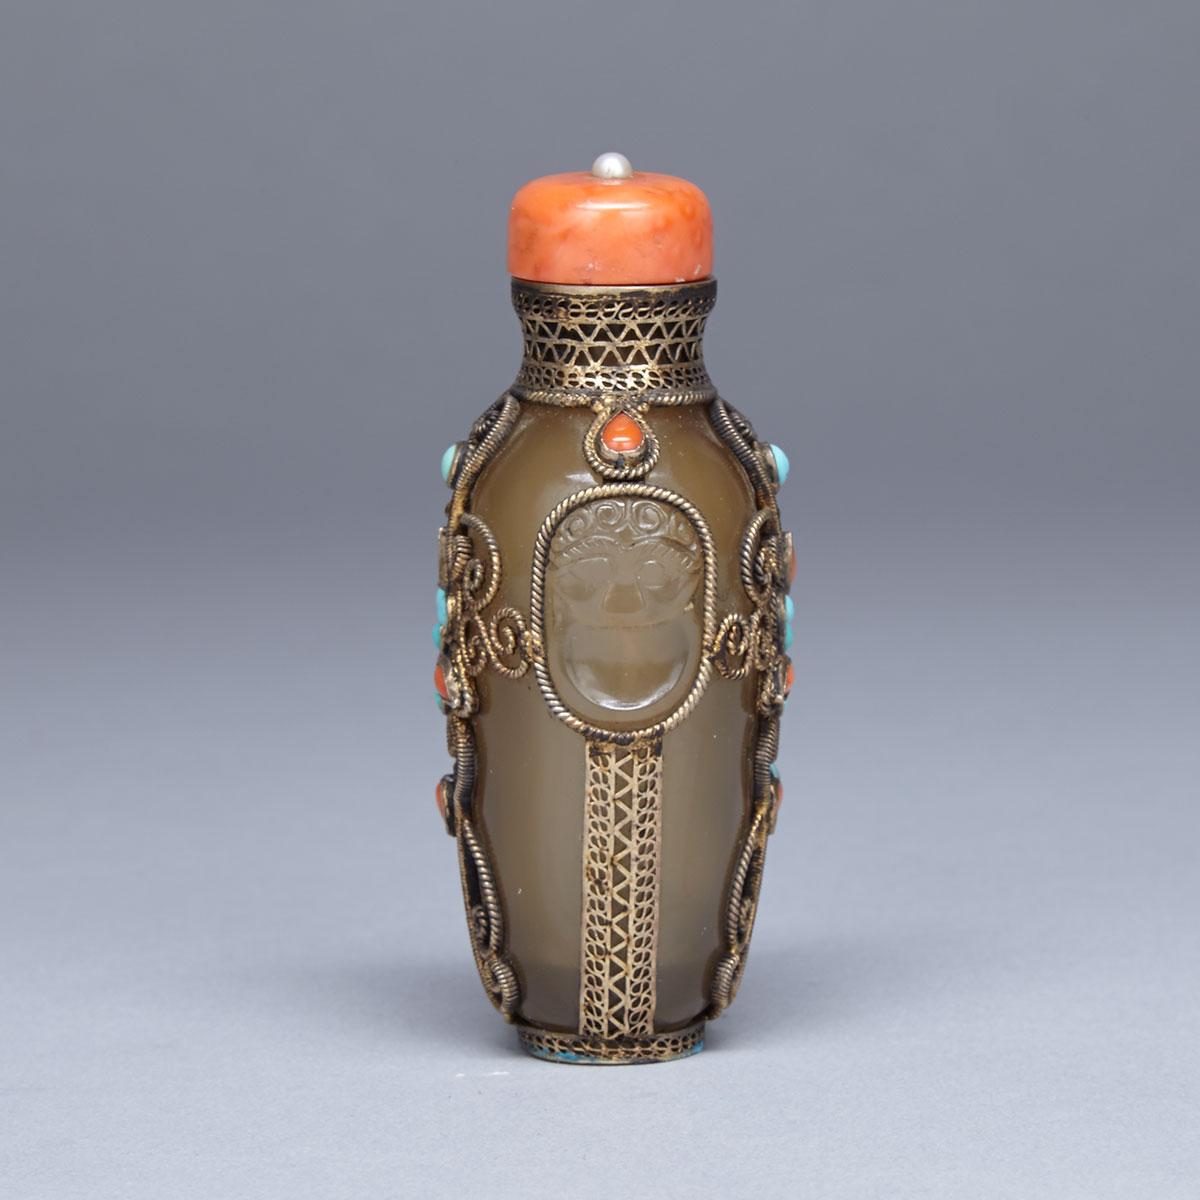 Hardstone and Silver Wire Embellished Agate Snuff Bottle, 19th Century